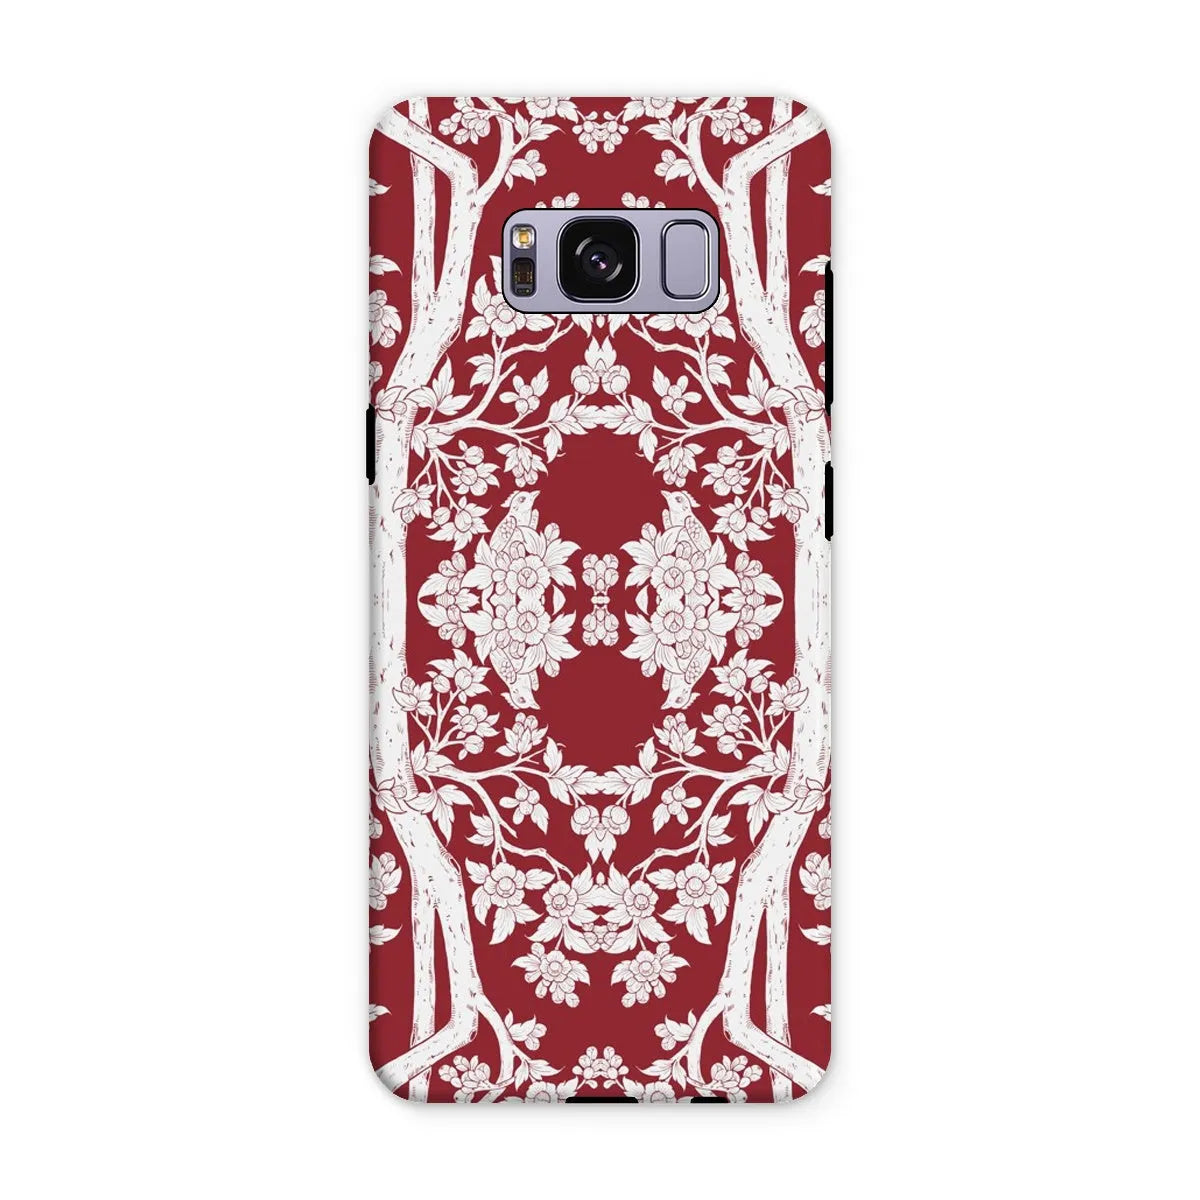 Aviary Red Aesthetic Pattern Art Phone Case - Samsung Galaxy S8 Plus / Matte - Mobile Phone Cases - Aesthetic Art